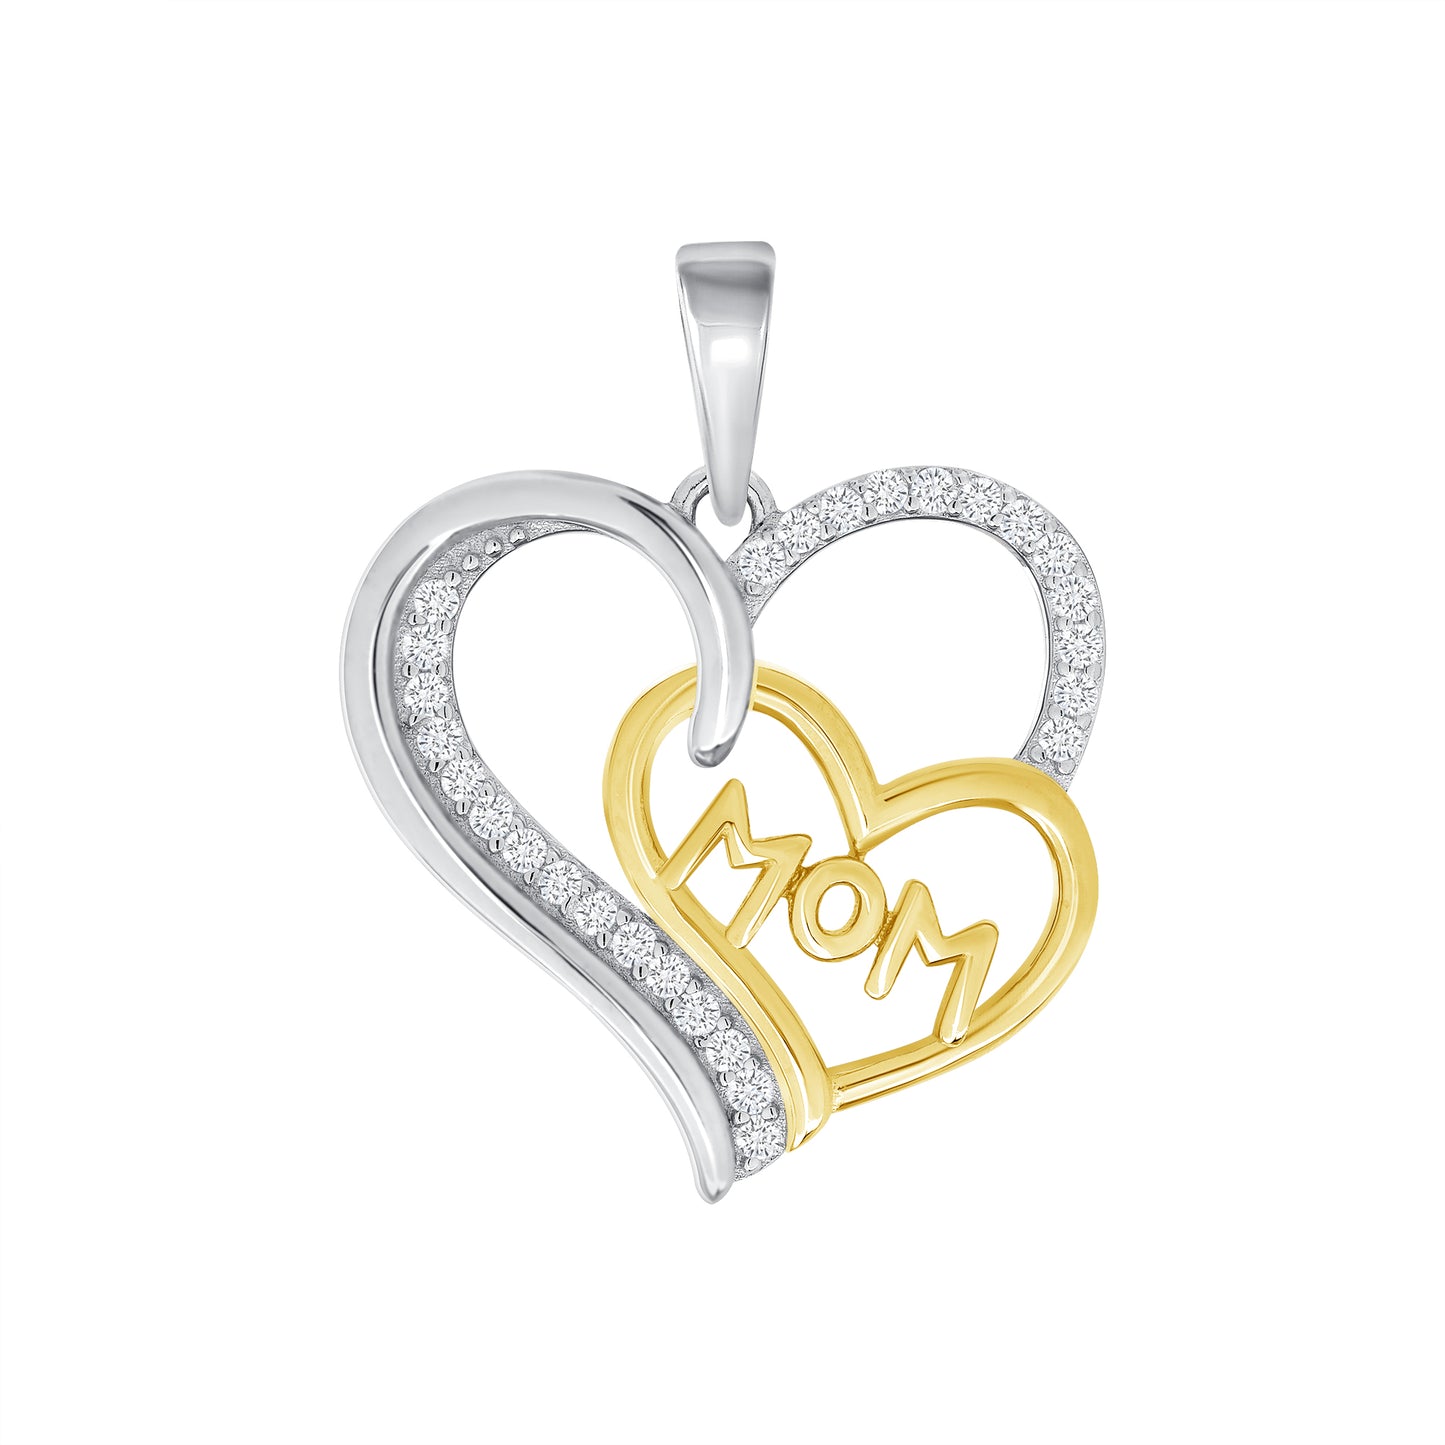 Silver 925 Two Tone Gold Plated 2 Hearts Cubic Zirconia Mom Pendant. DGP1837GP